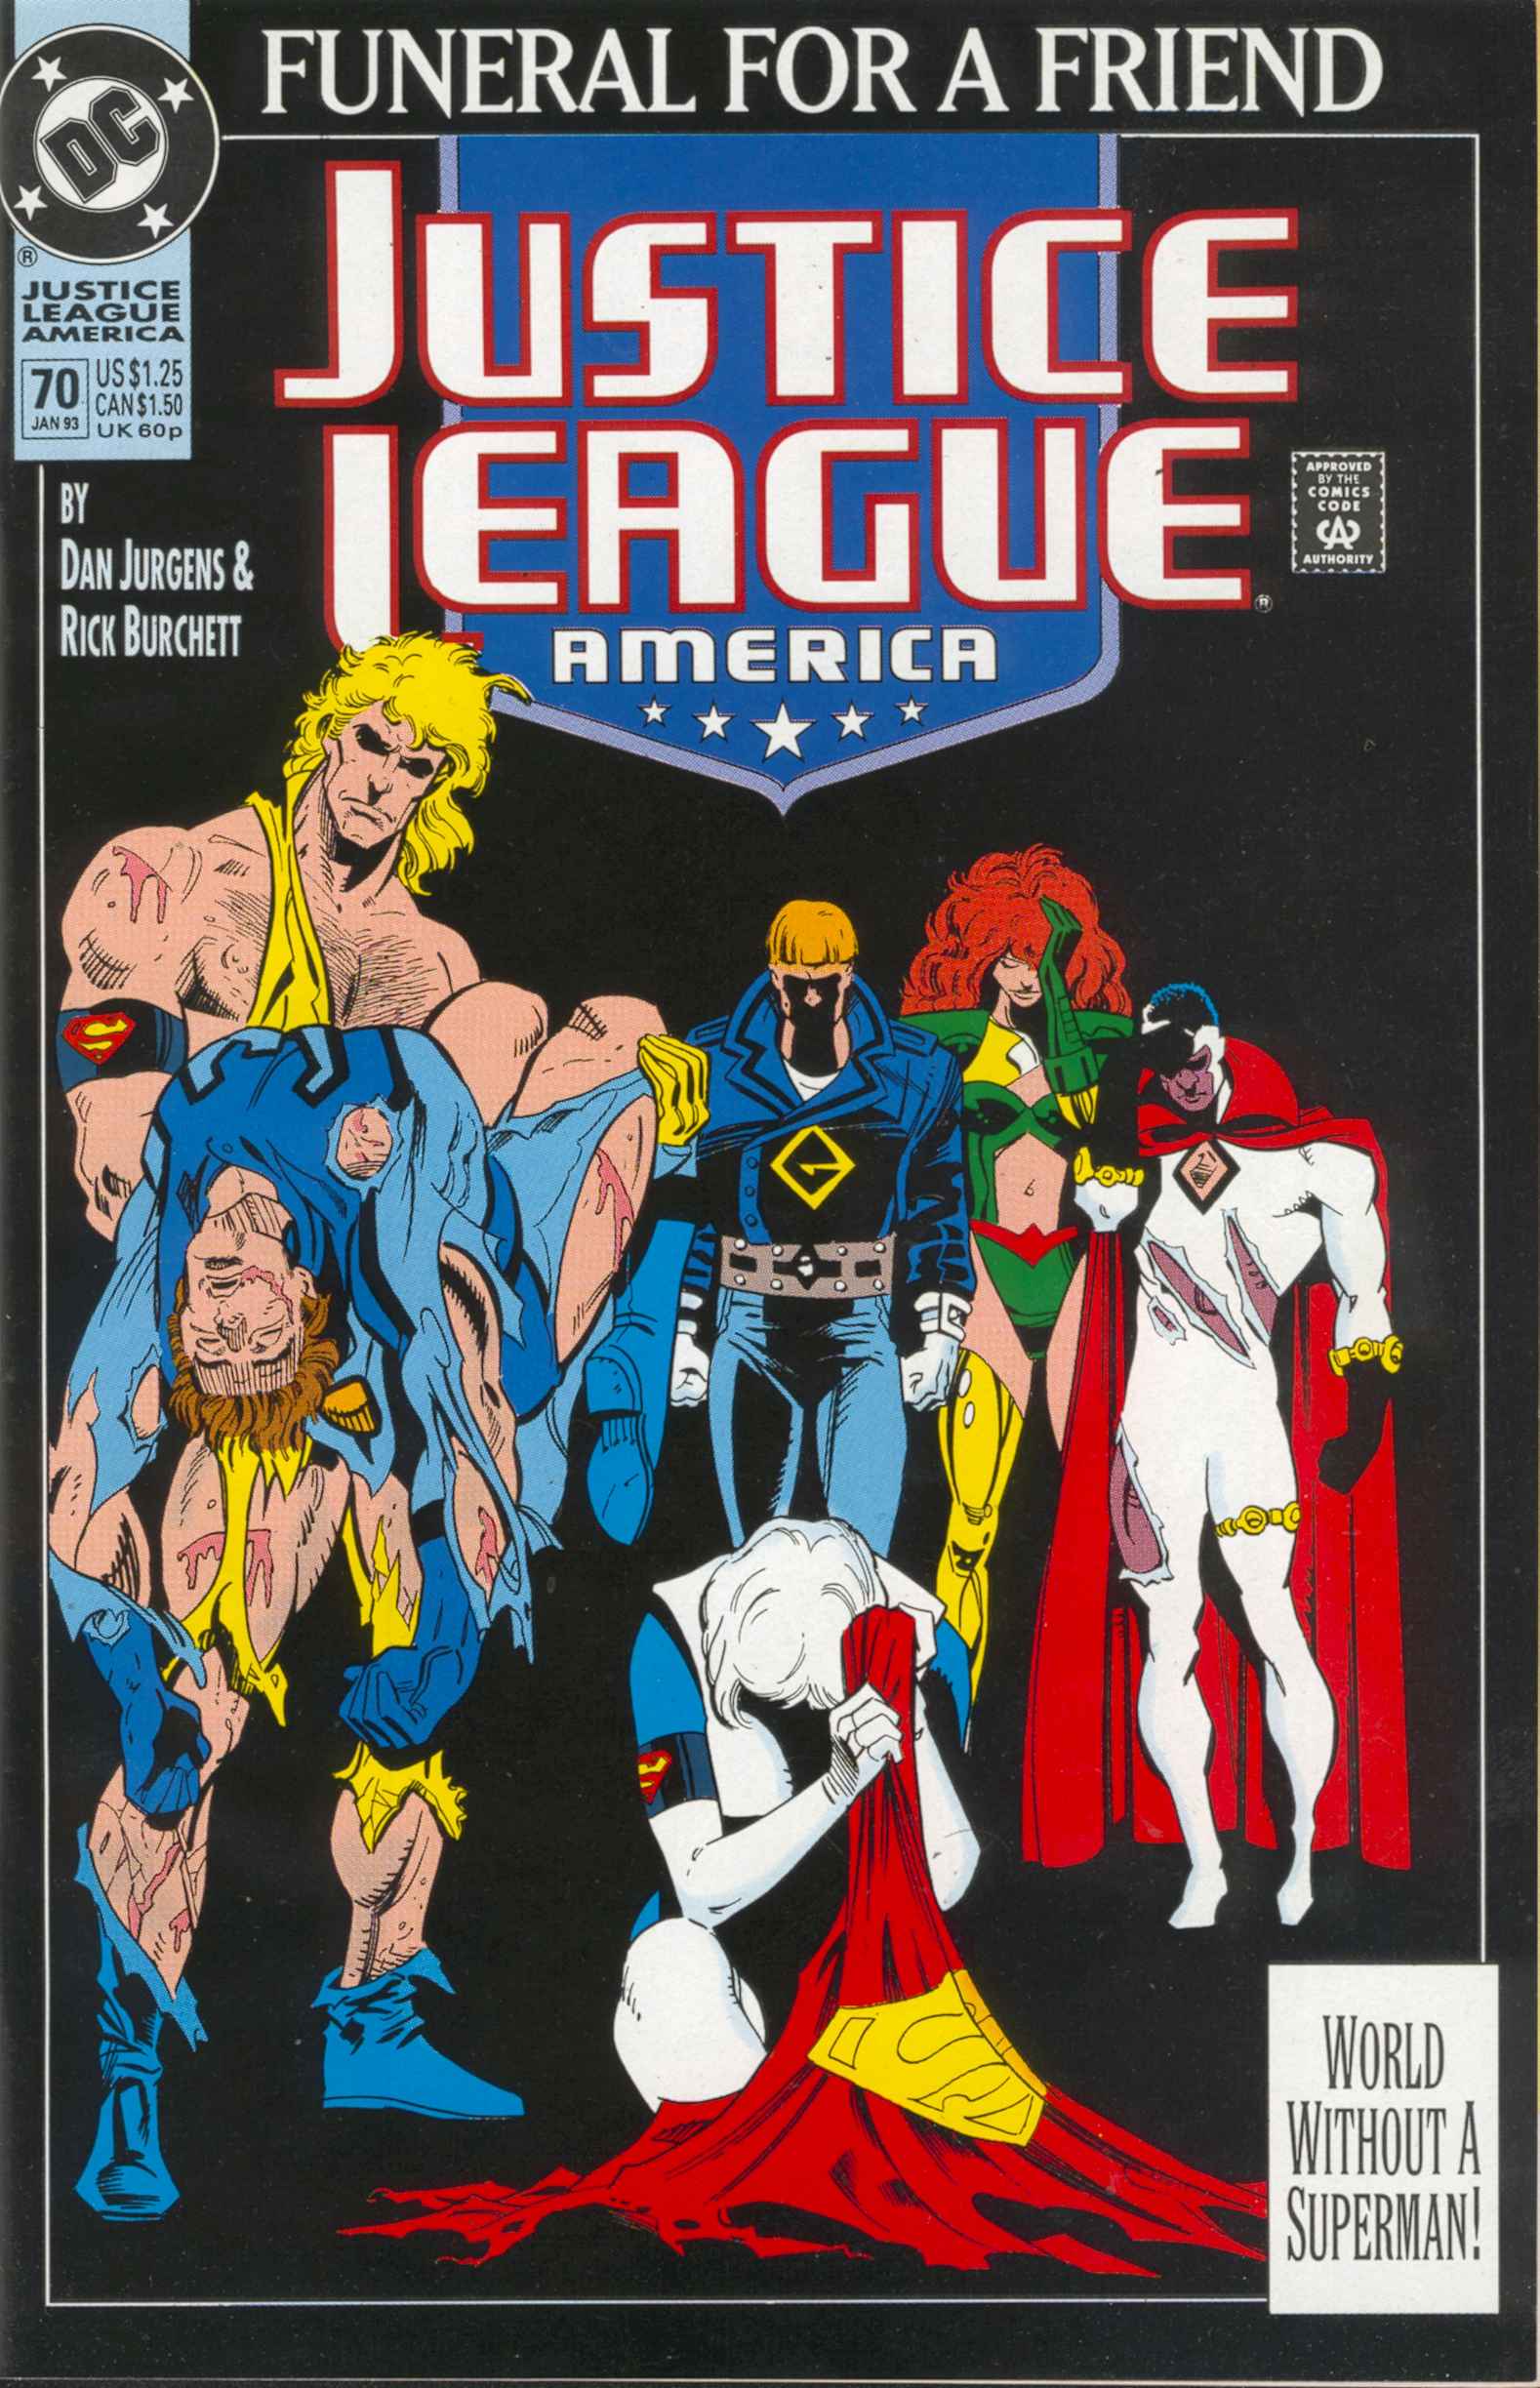 Read online Justice League America comic -  Issue #70 - 2